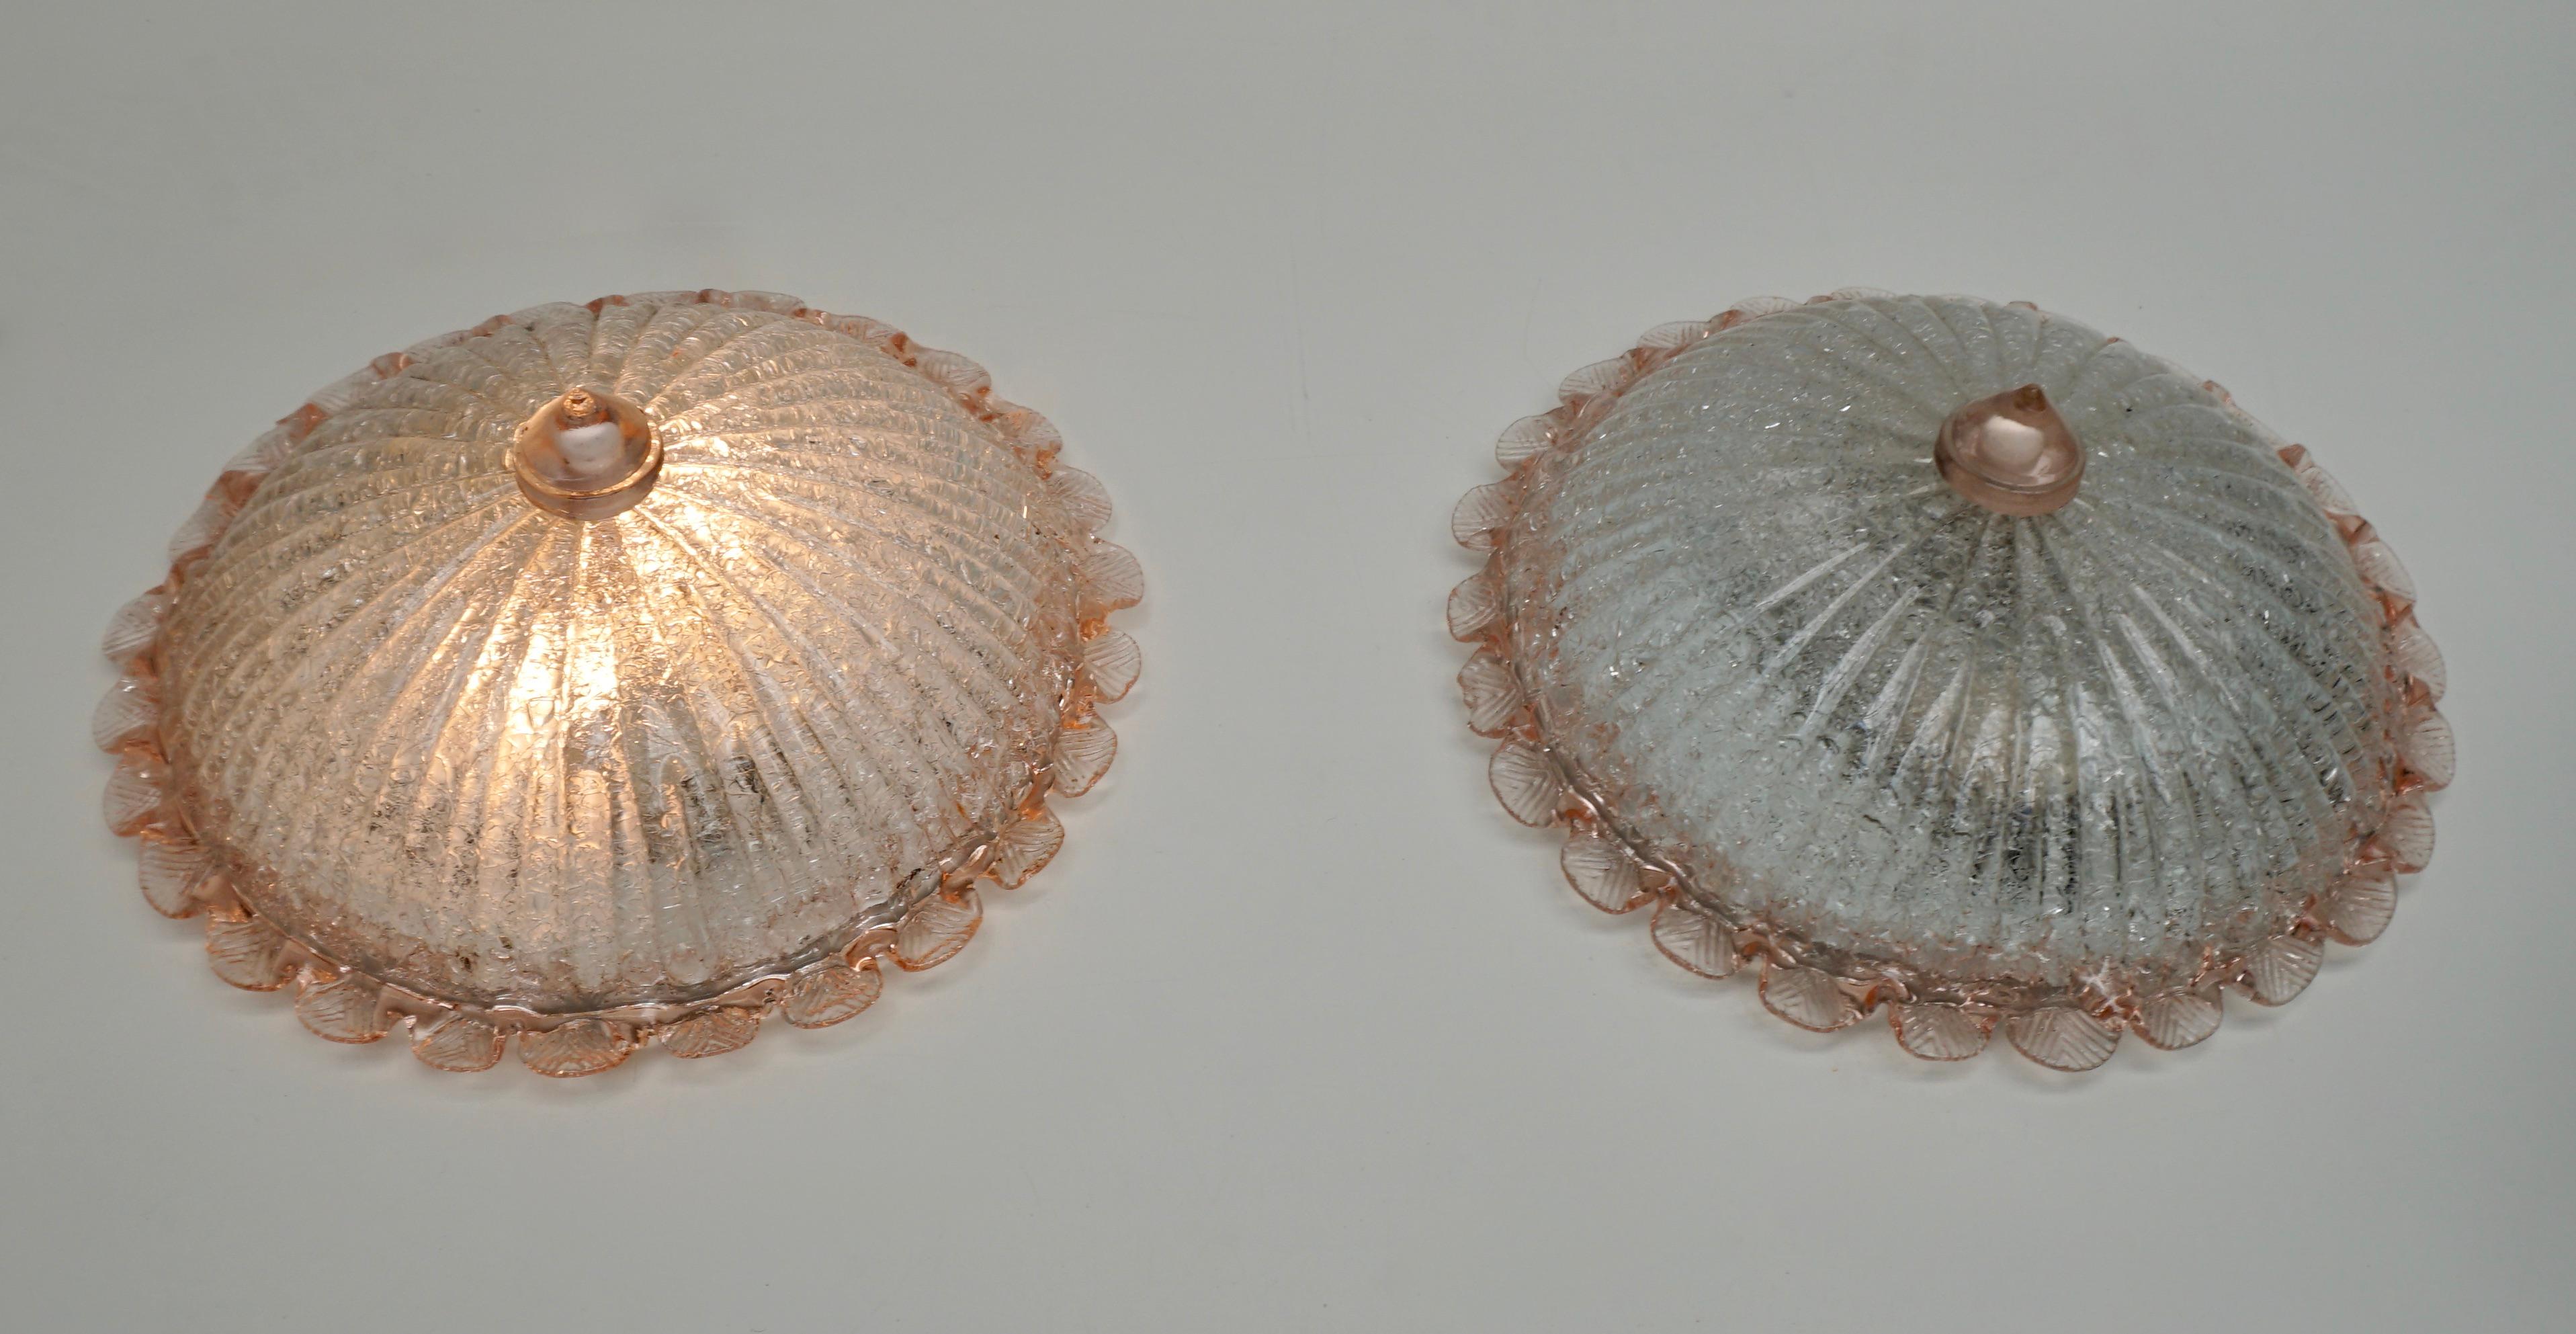 Two elegant hand blown Murano glass flushmount by Barovier & Toso. Mounted on a white frame. With pink, salmon and clear colored glass. The textured glass refract light beautifully. The flushmount fills the room with a soft, warm and welcoming glow.